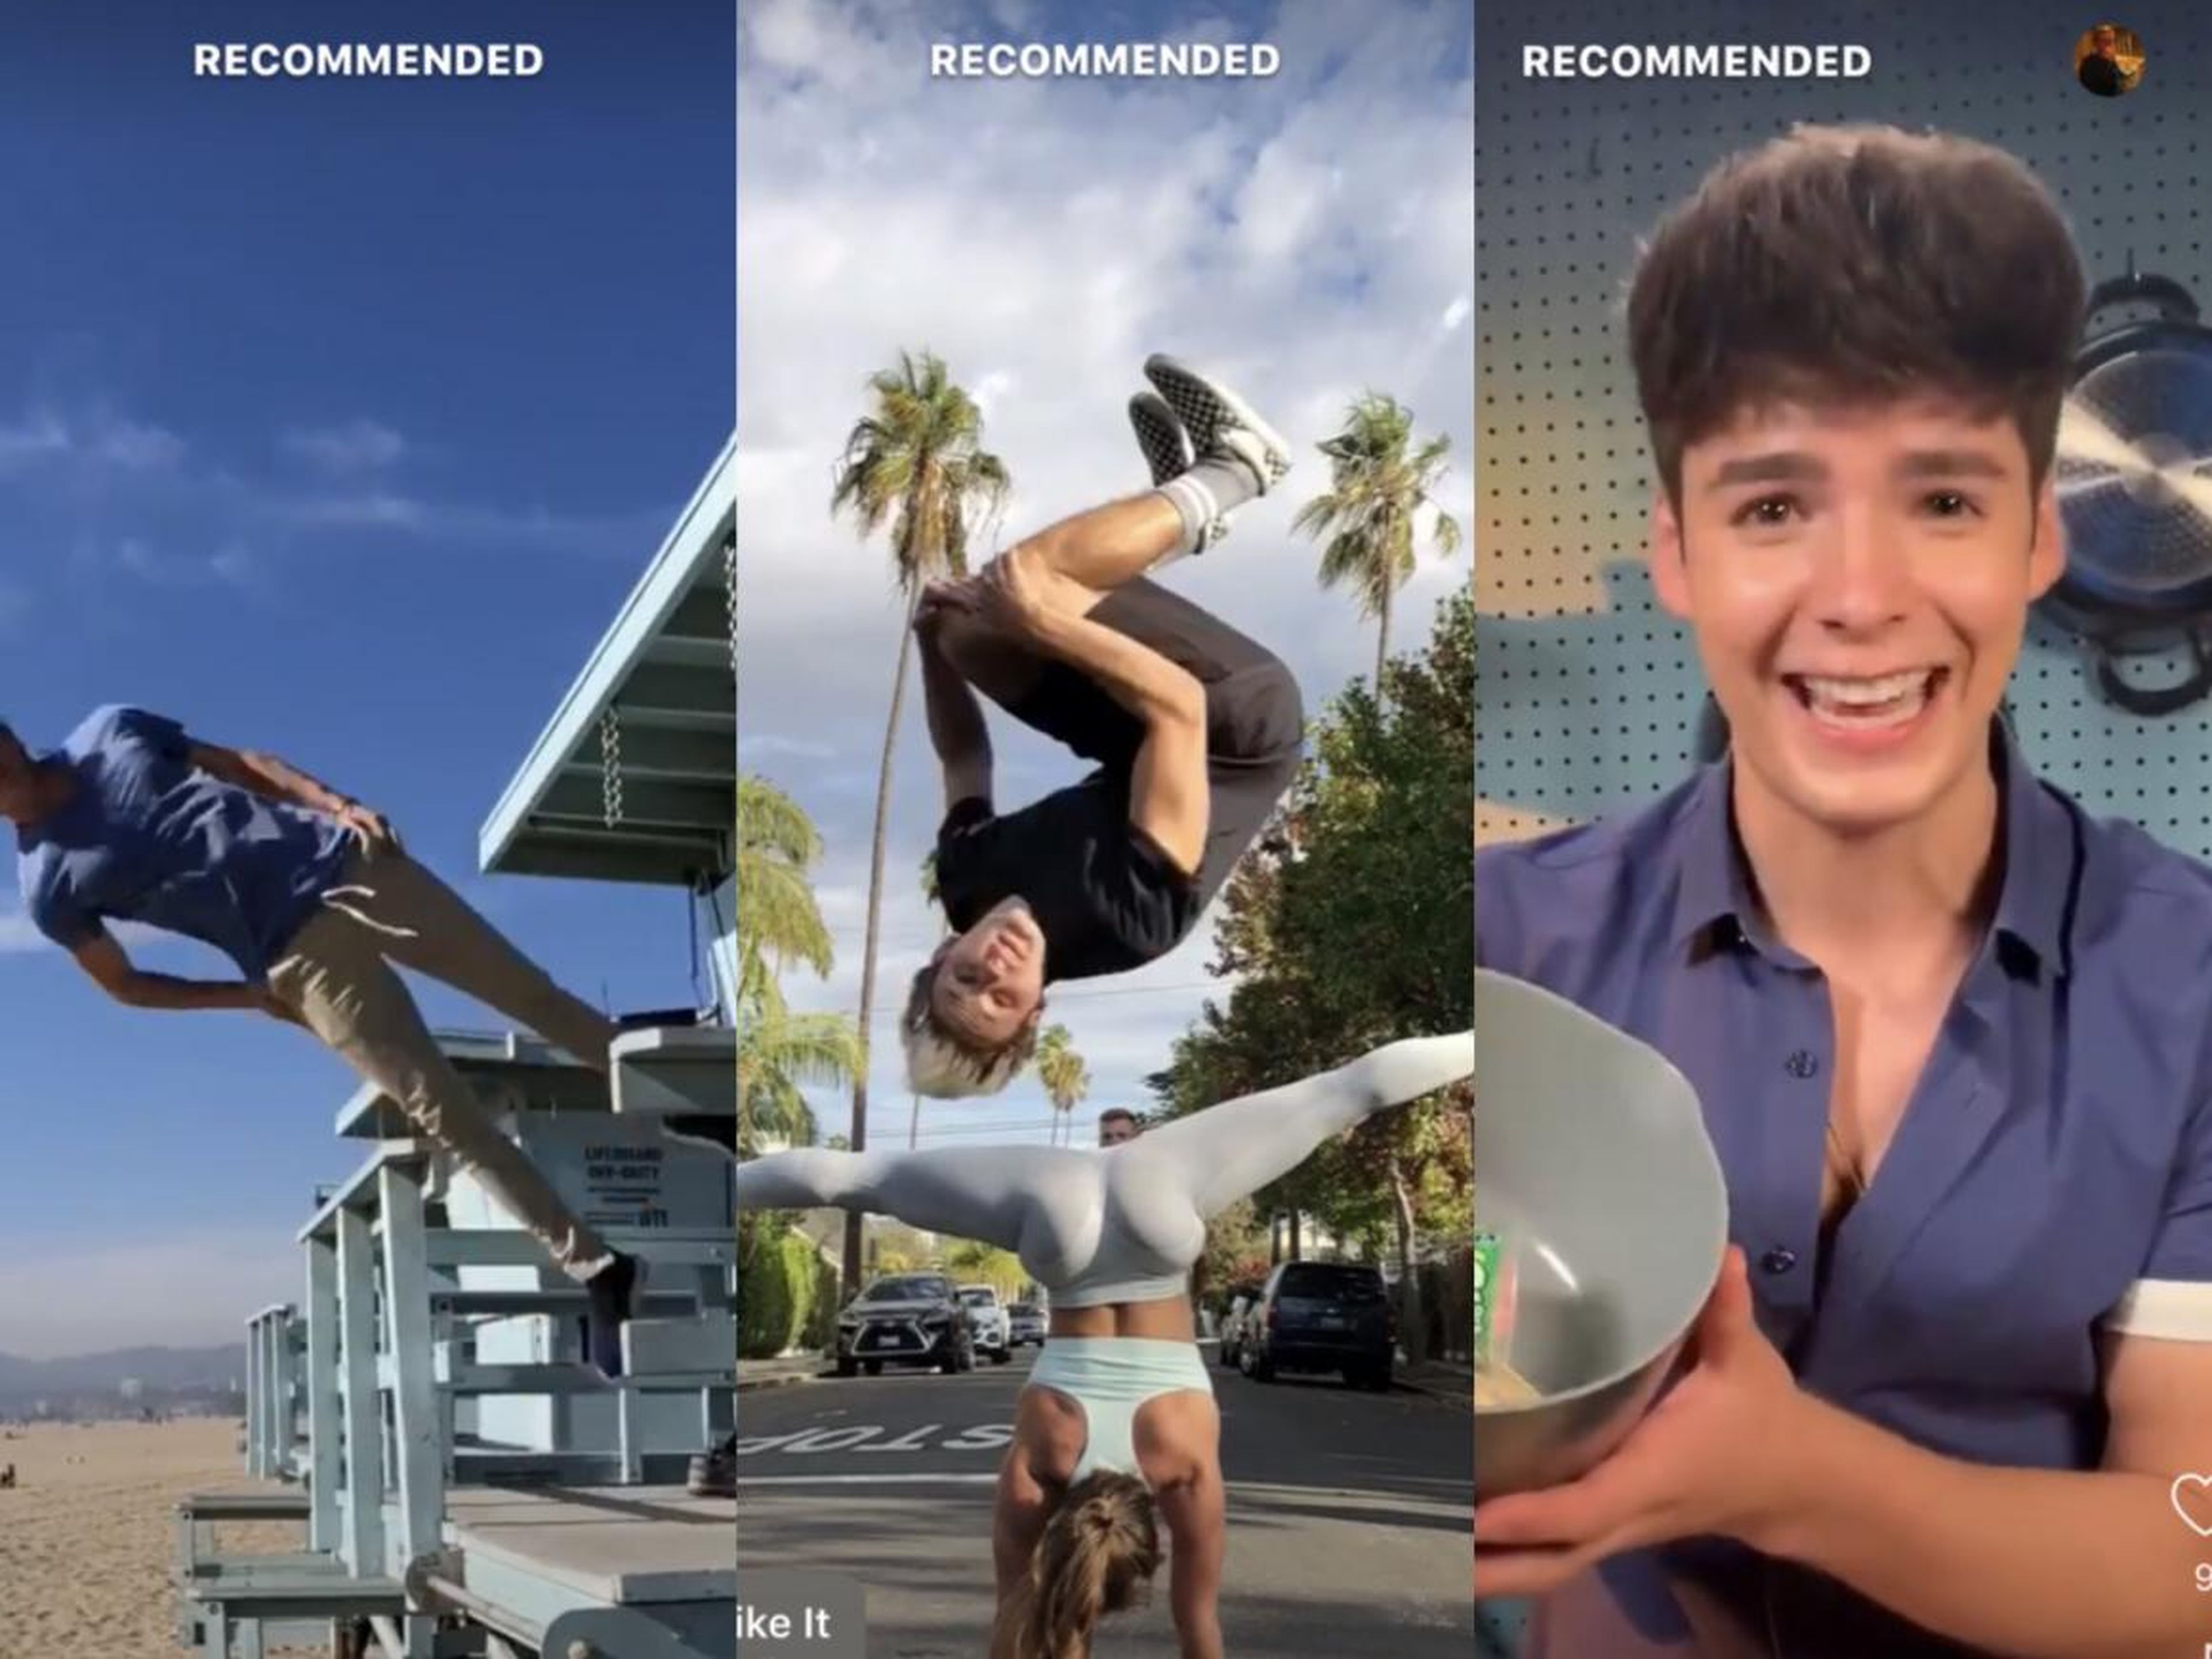 Facebook just launched a standalone video app called Lasso and it's basically the exact same thing as TikTok